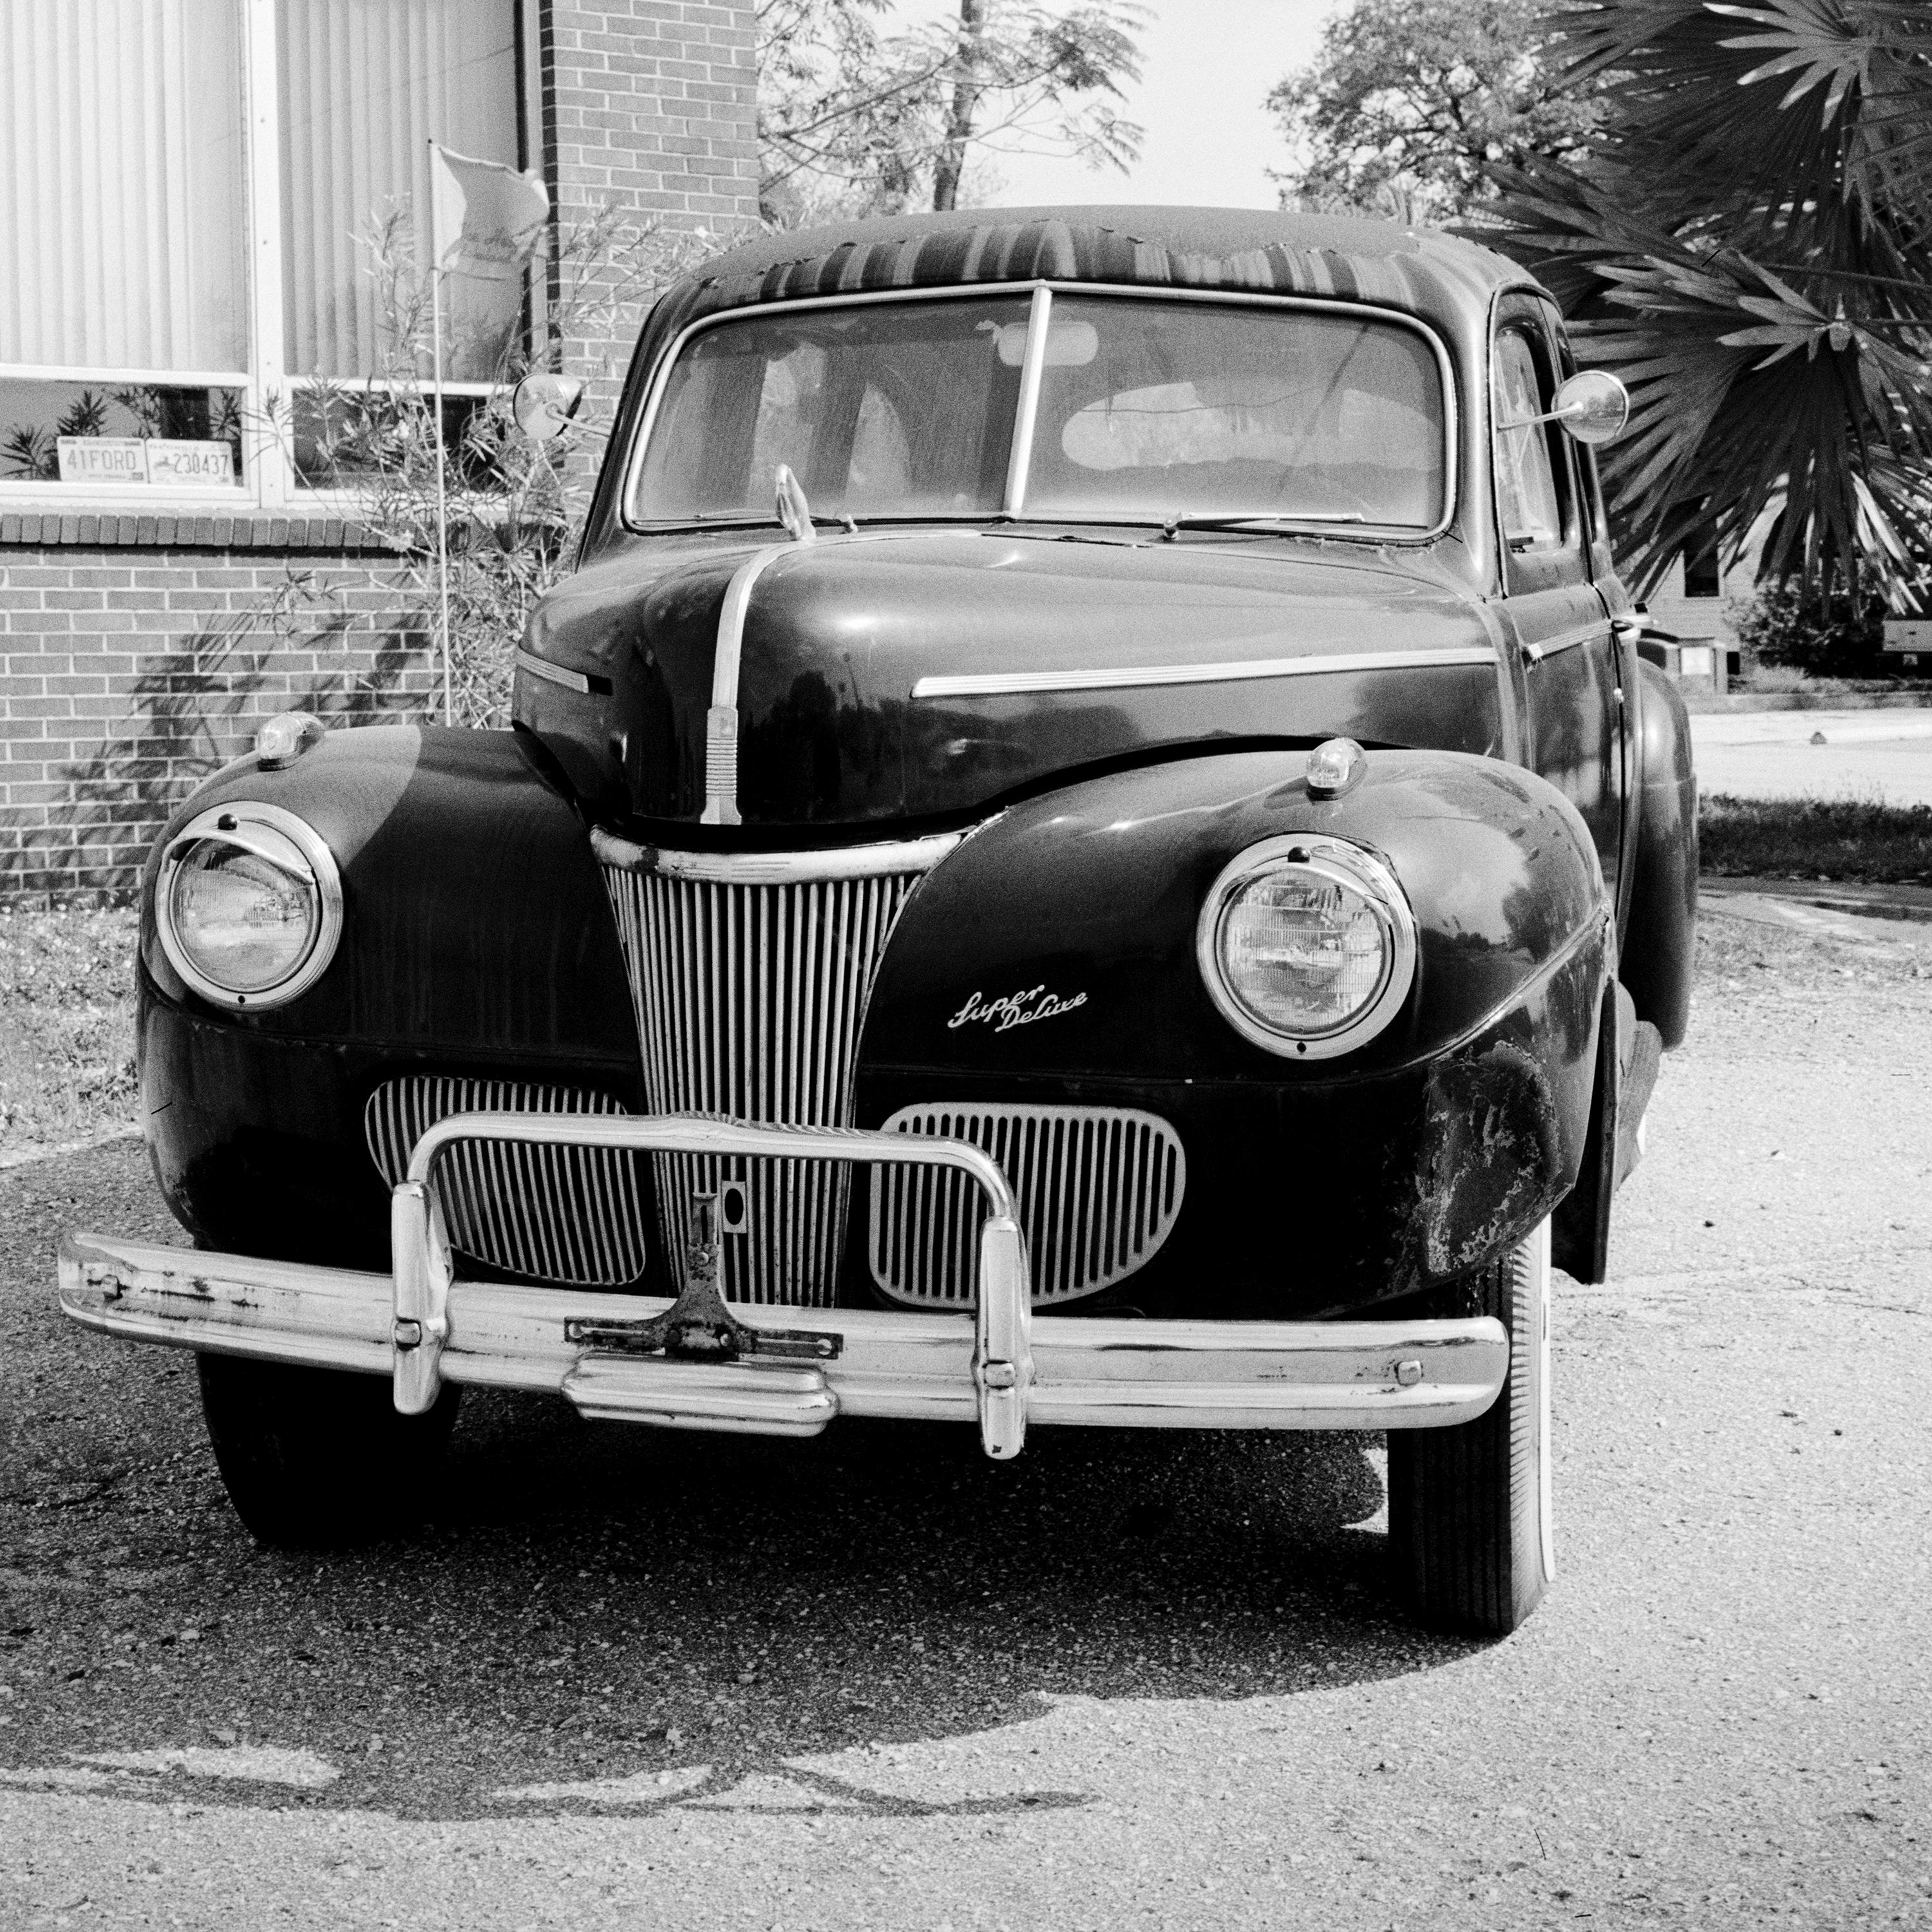 Black and White Fine Art Photography for Sale - 1941 Ford Super Deluxe Business Coupe, classic car, old timer in front of a house with palm trees. Archival pigment ink print, edition of 9. Signed, titled, dated and numbered by artist. Certificate of